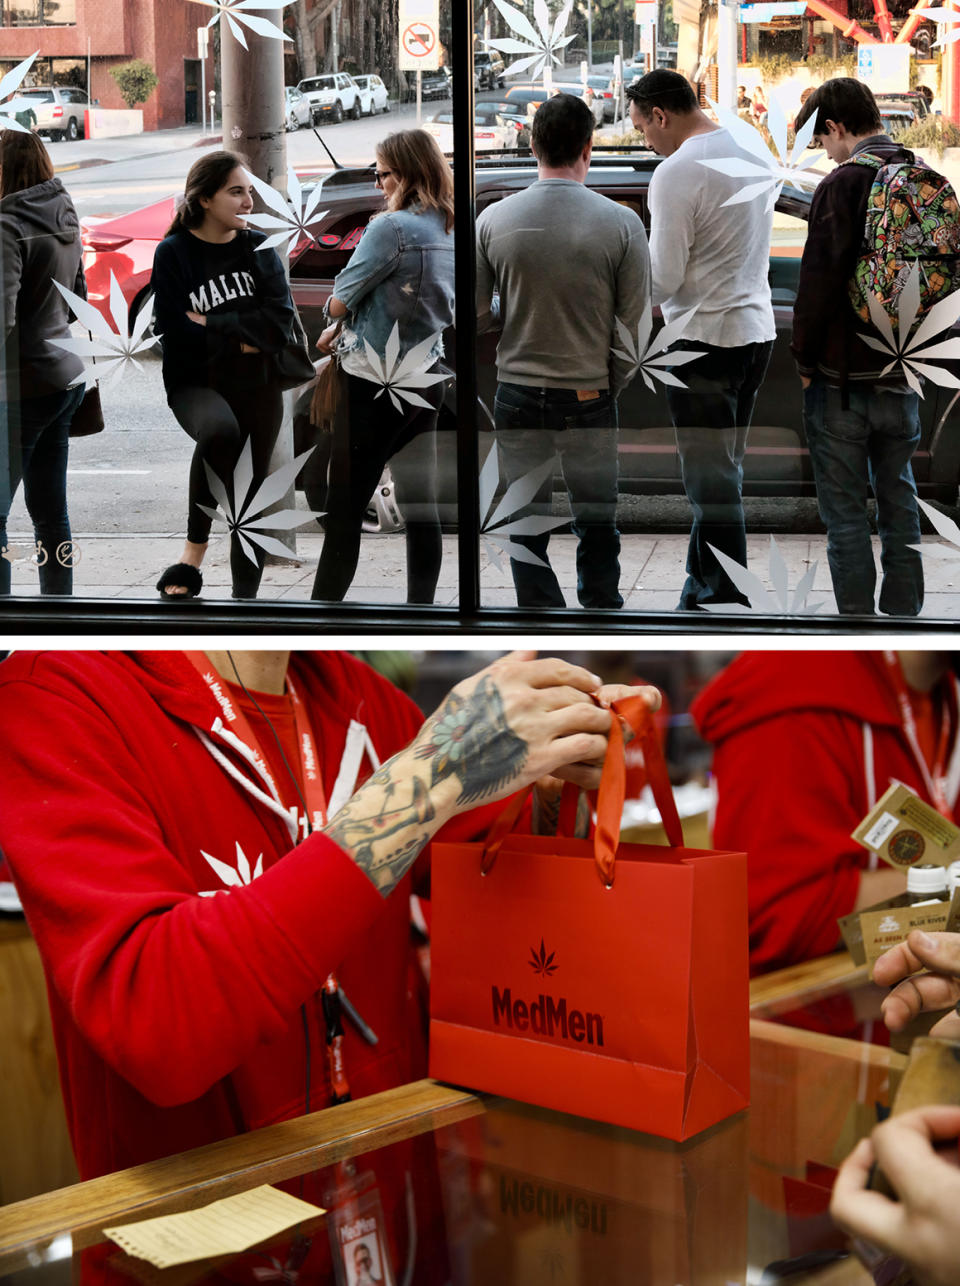 Top: Customers line up for recreational marijuana outside one of MedMen's marijuana dispensaries in Los Angeles in January 2018. Bottom: An employee hands a customer a shopping bag at the MedMen dispensary in West Hollywood in January 2018.